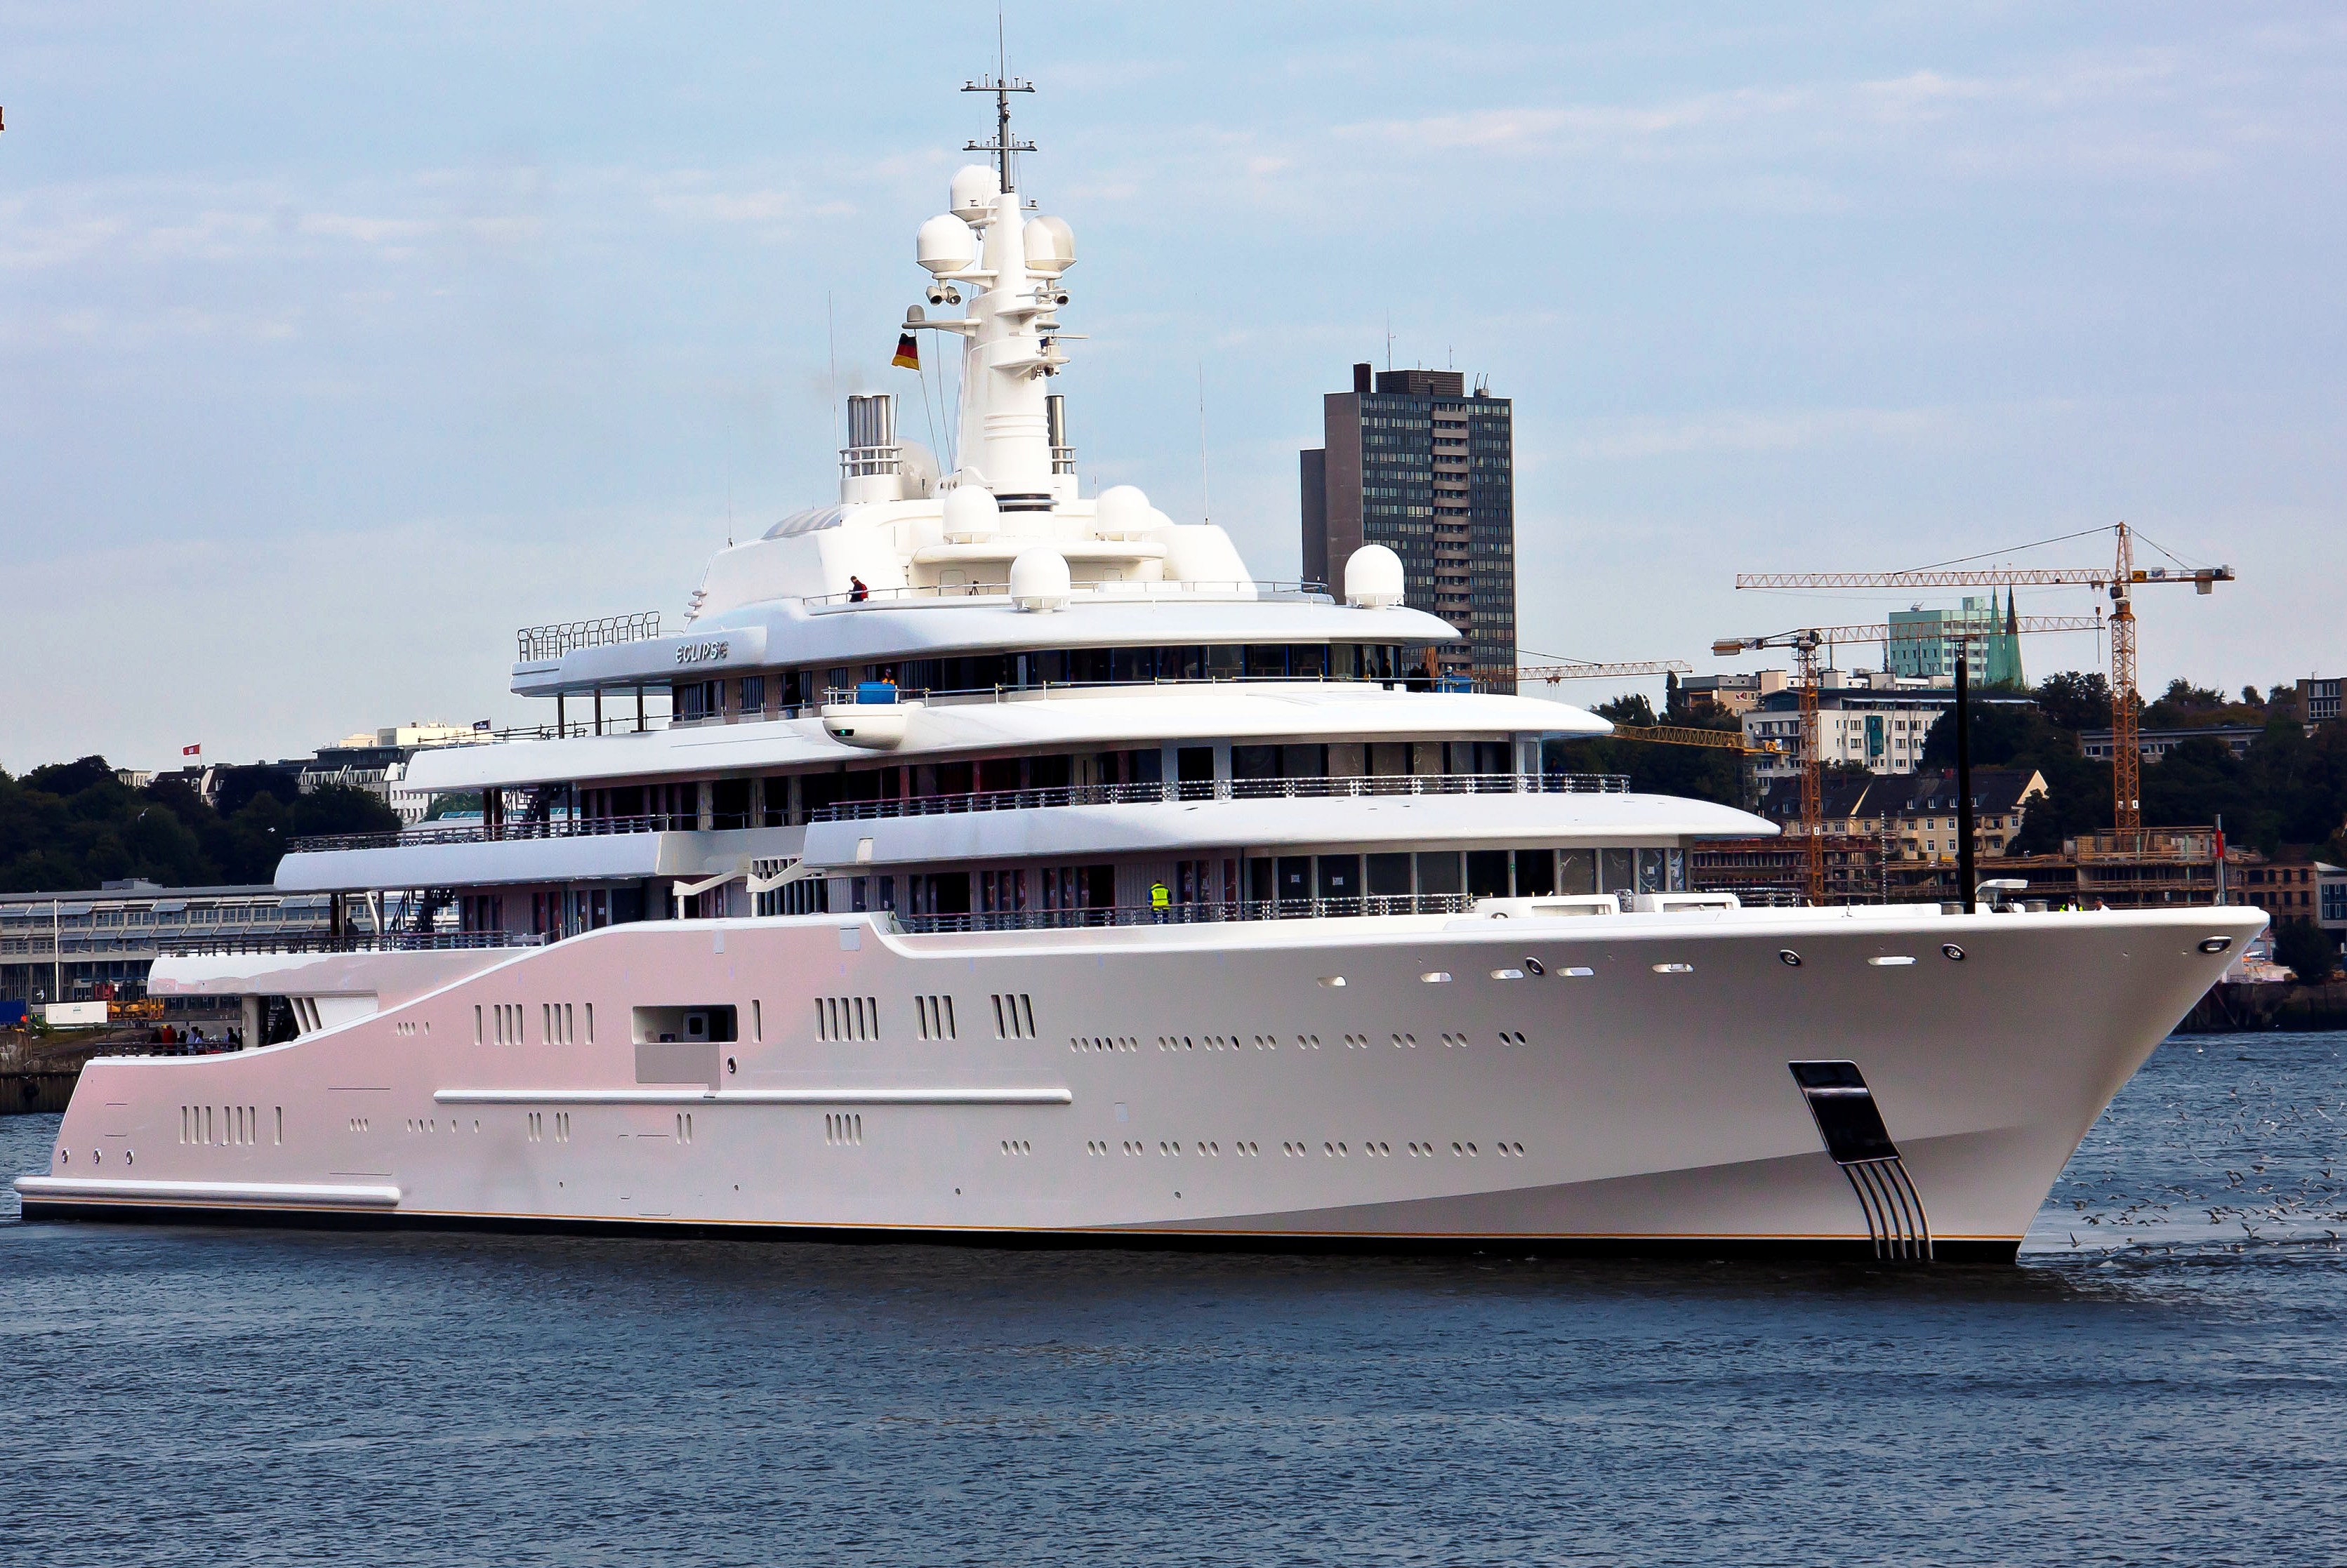 of yacht Eclipse as yet. - Photos of the Largest Superyacht ECLIPSE